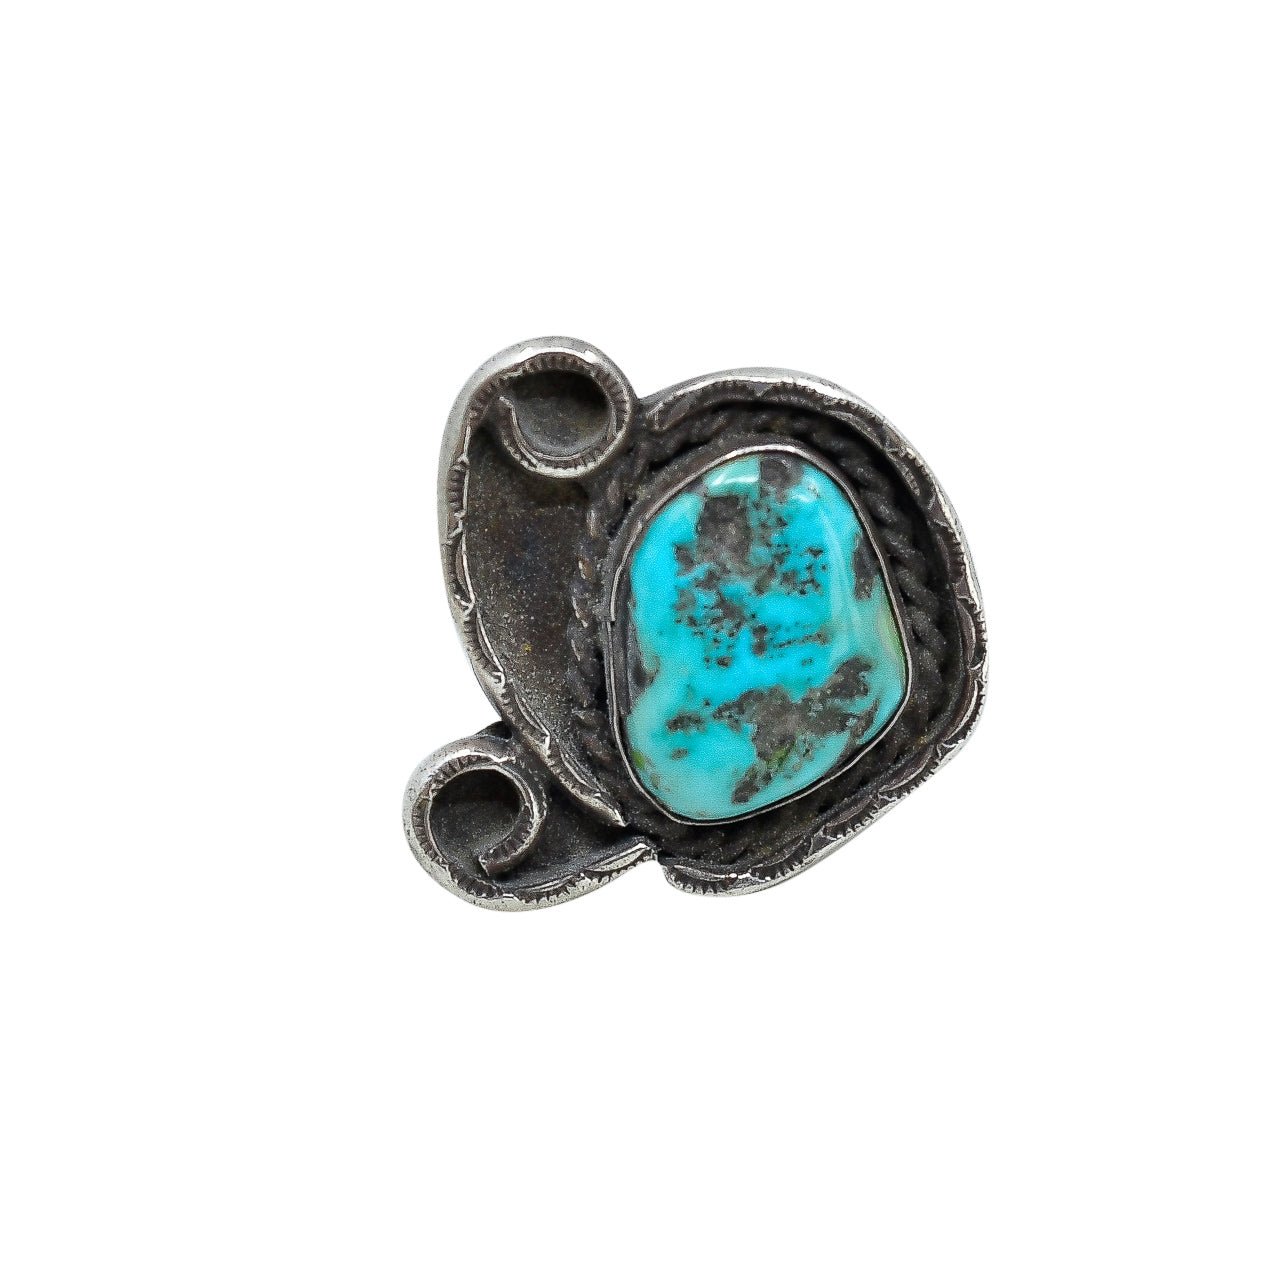 Vintage Turquoise Nugget Ring of Heavy Gauge Sterling Silver - Turquoise & Tufa